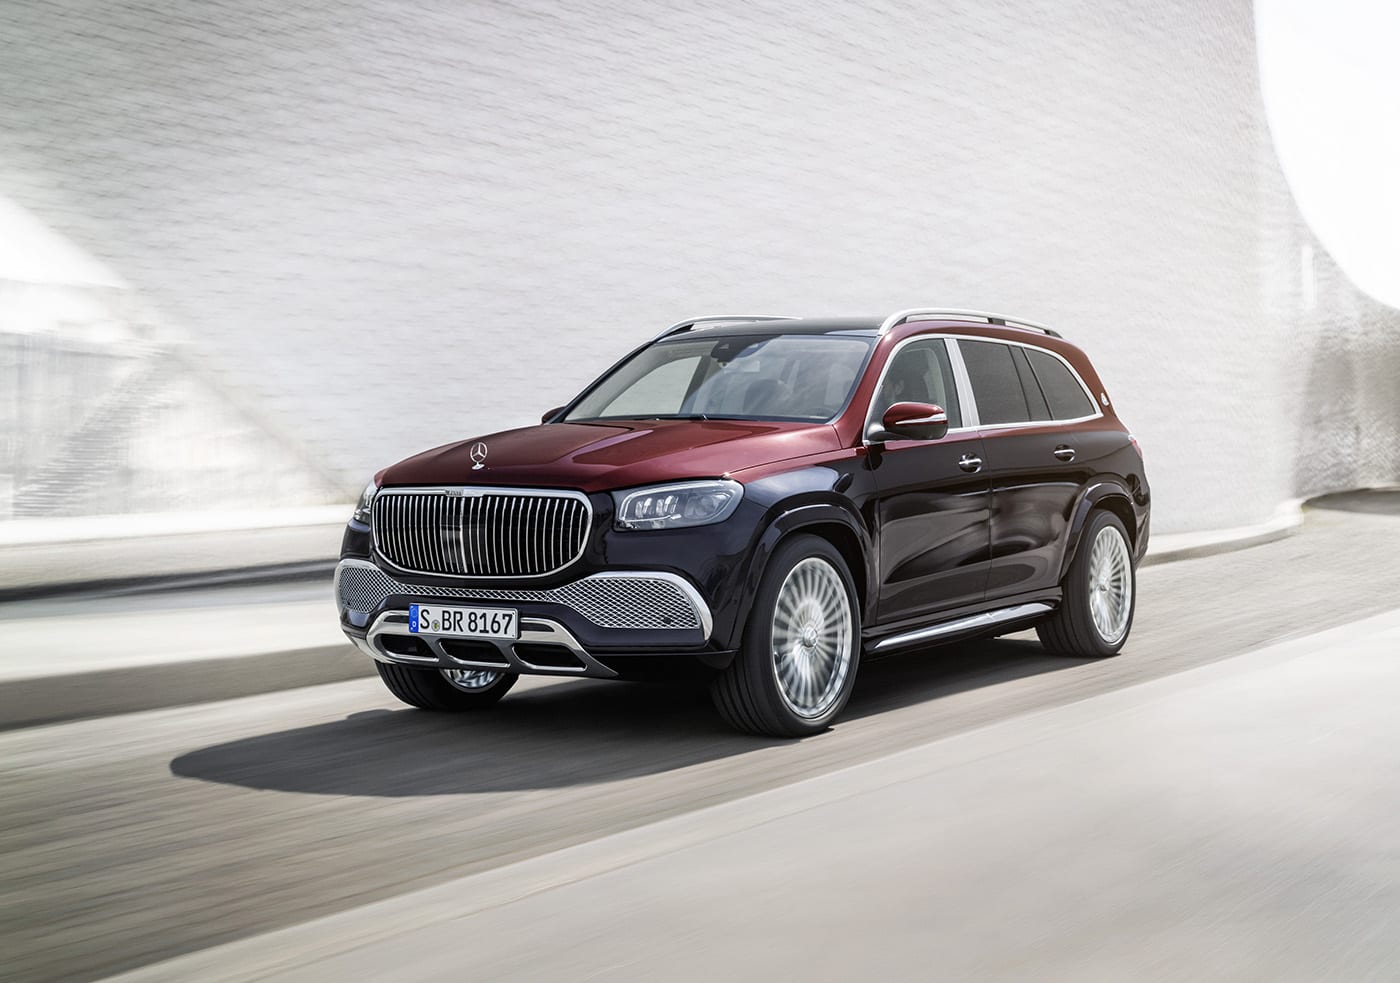 Mercedes Maybach GLS Pricing Announced Expensive Mercedes SUV